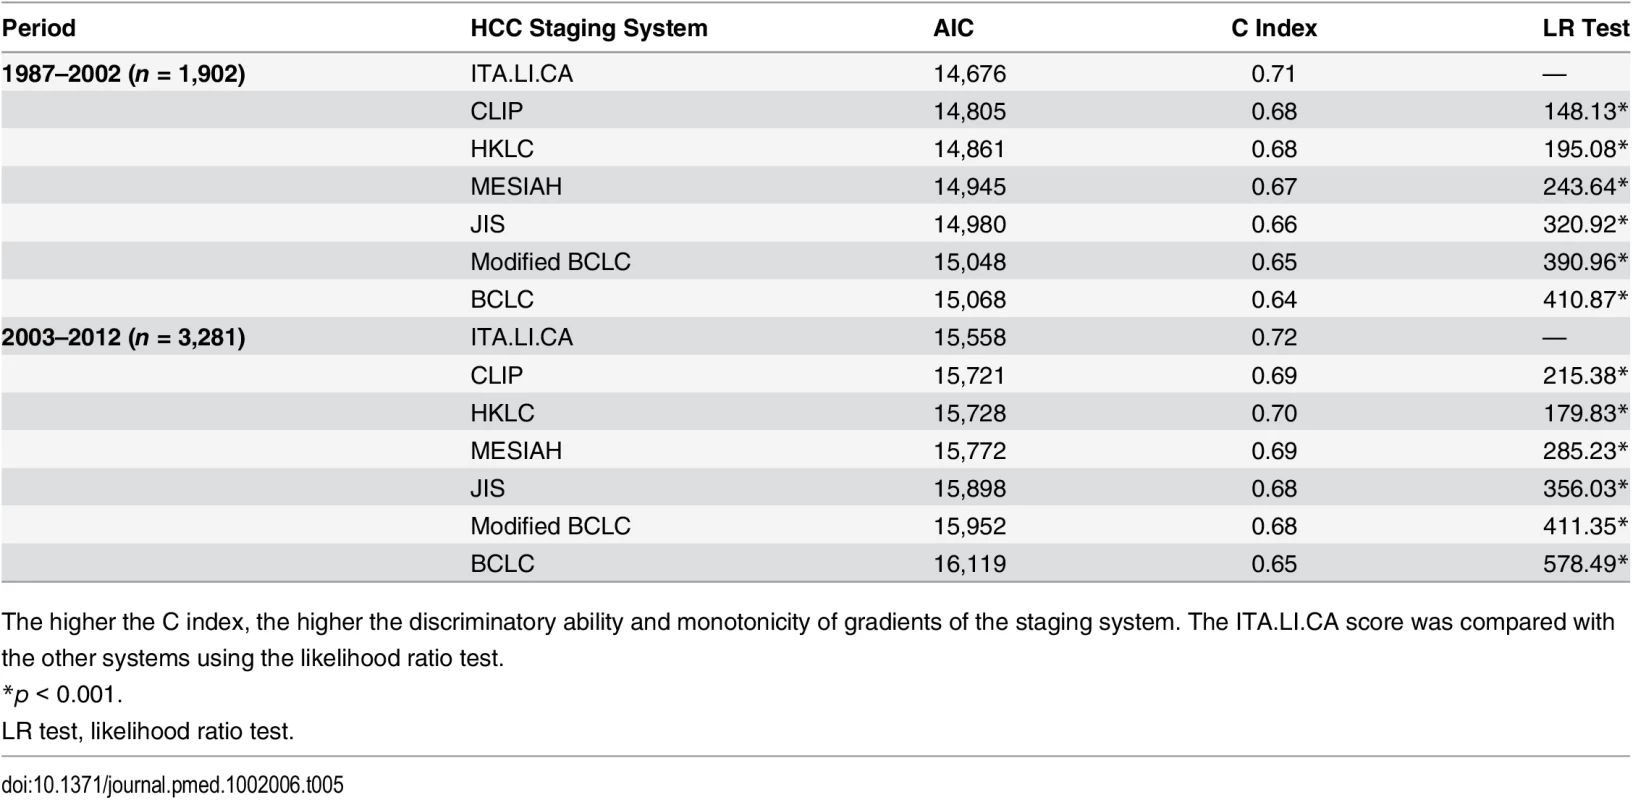 Discrimination ability of the integrated ITA.LI.CA prognostic system and comparison with other staging systems in the training and internal validation cohorts (<i>n</i> = 5,183) stratified based on study period.